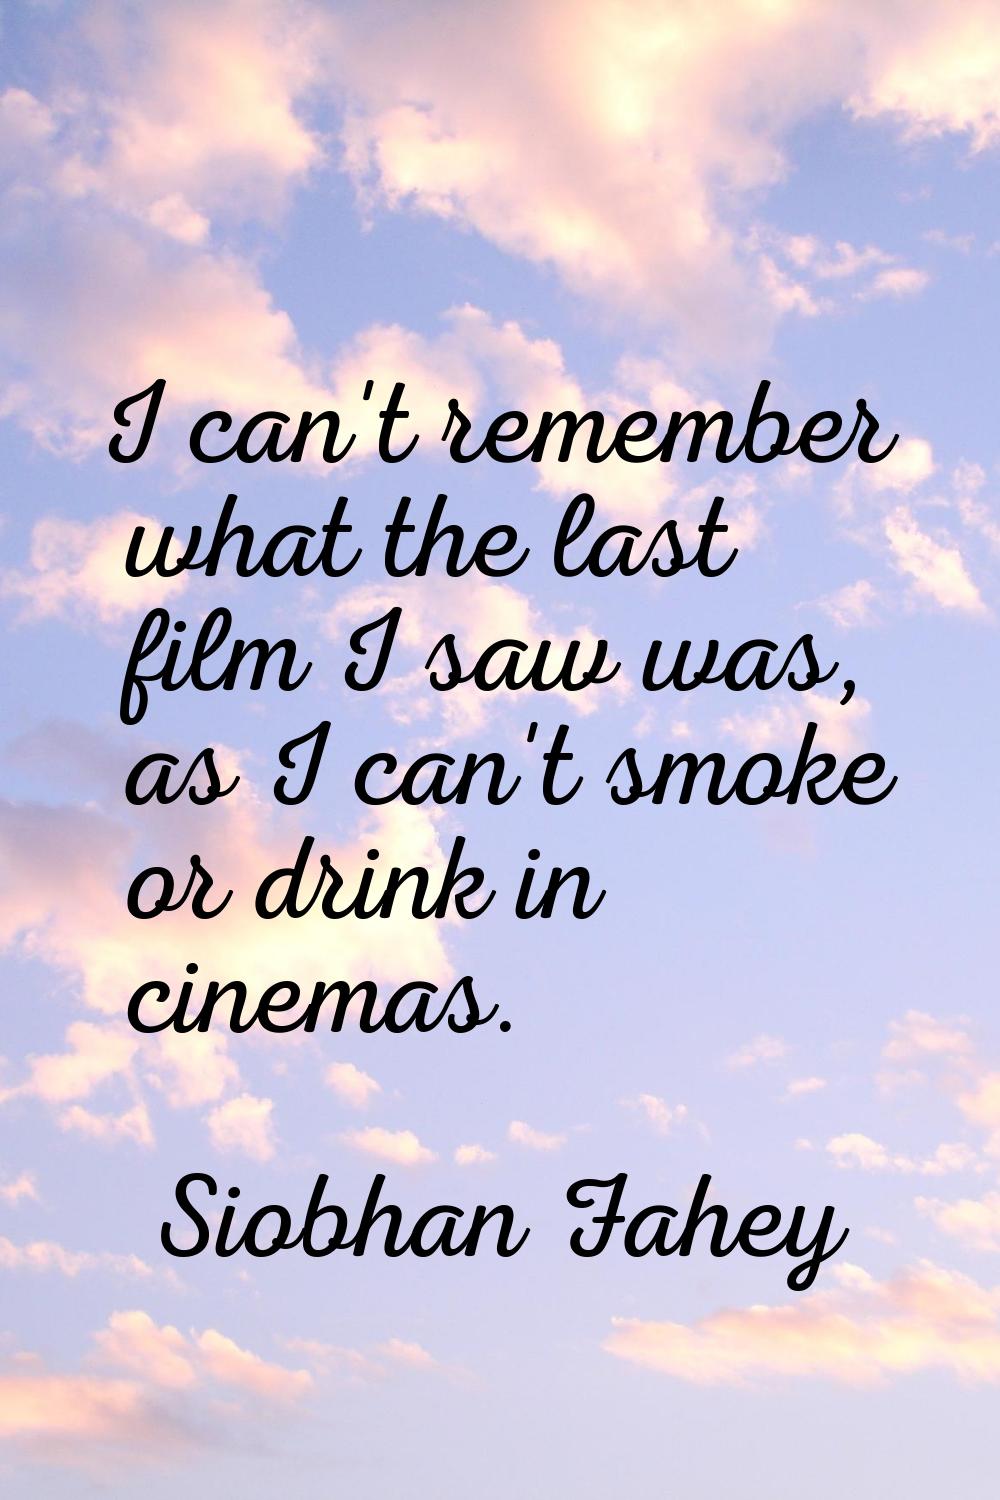 I can't remember what the last film I saw was, as I can't smoke or drink in cinemas.